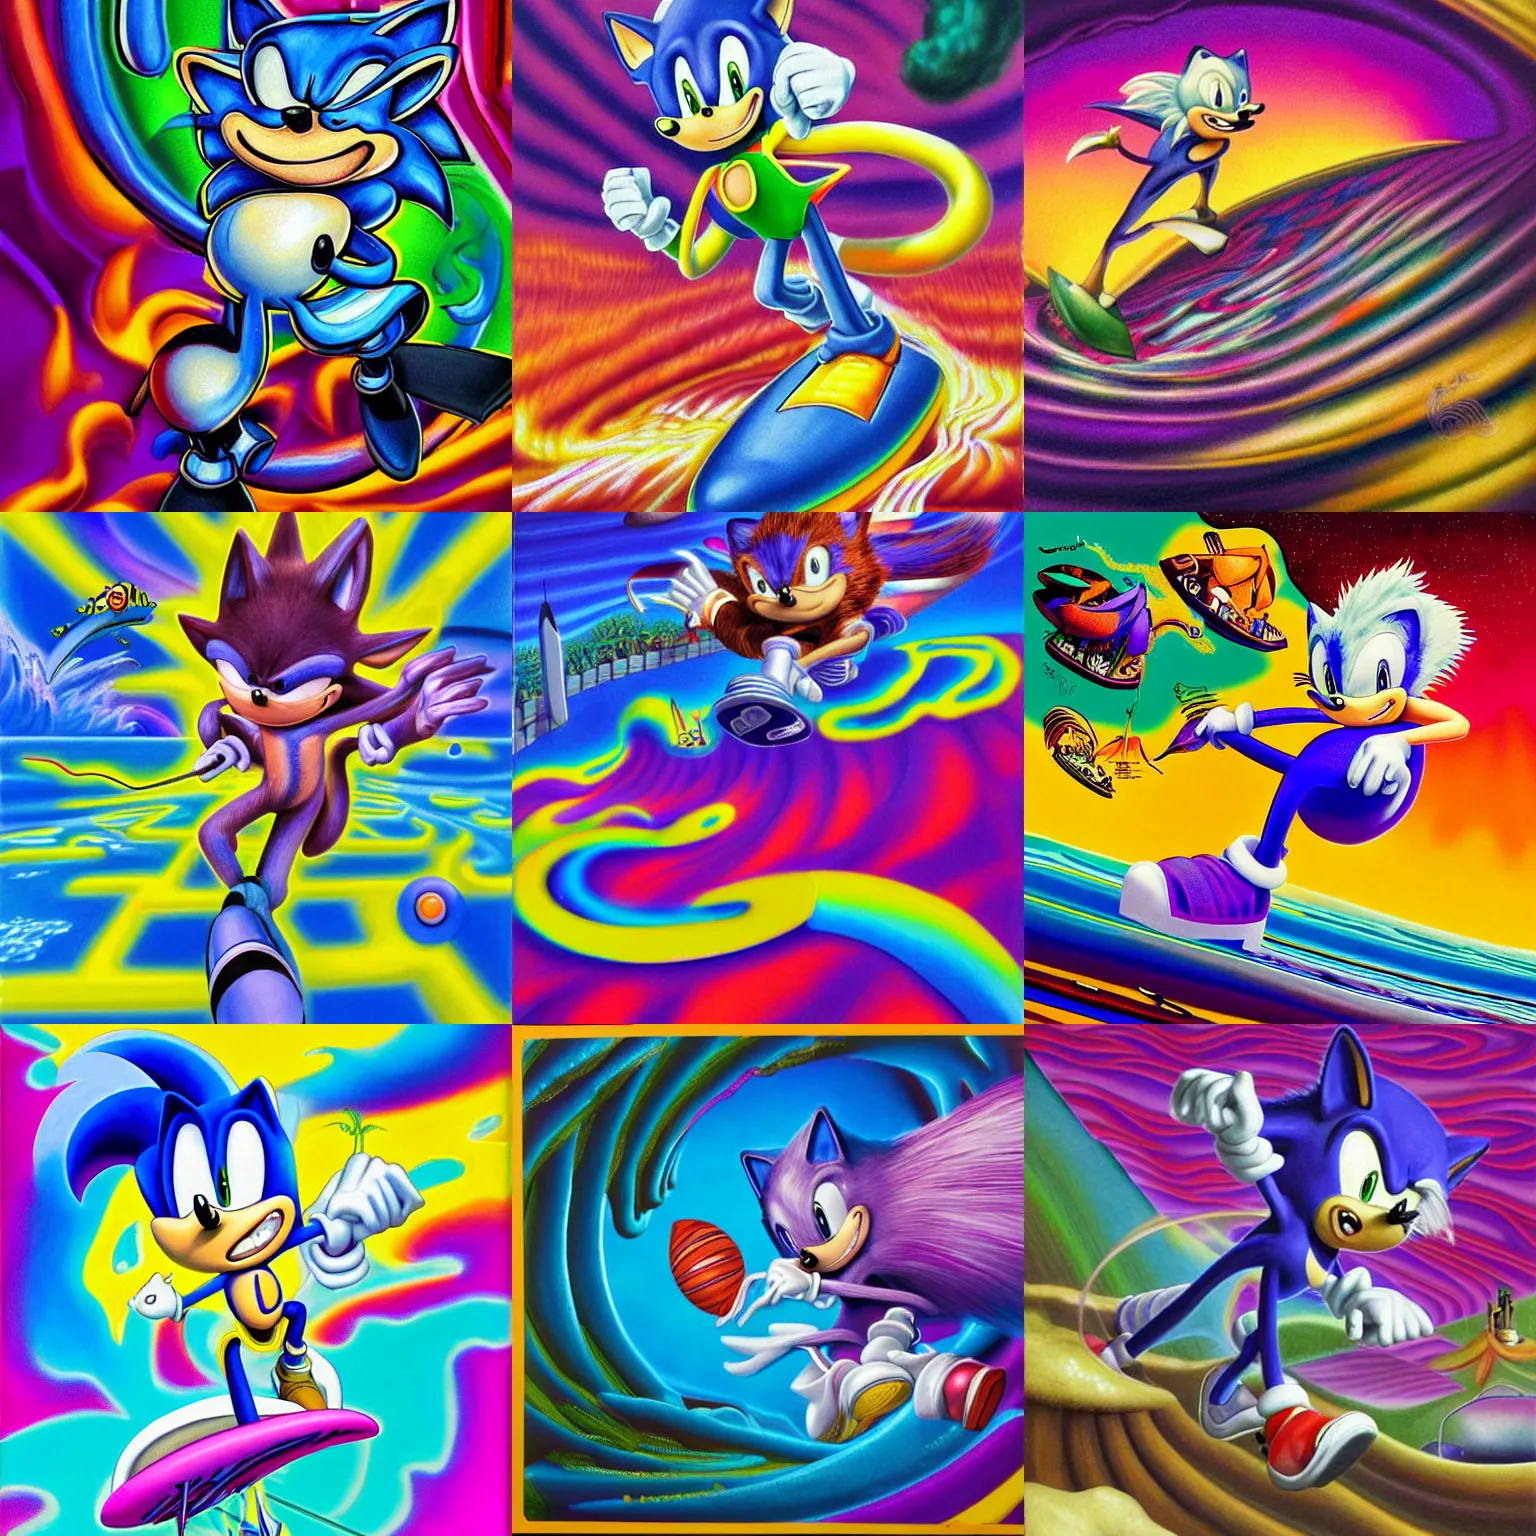 Prompt: surreal, sharp, detailed professional, soft pastels, high quality airbrush art of a liquid dissolving airbrush art lsd dmt sonic the hedgehog surfing through cyberspace, purple checkerboard background, 1 9 9 0 s 1 9 9 2 sega genesis video game album cover